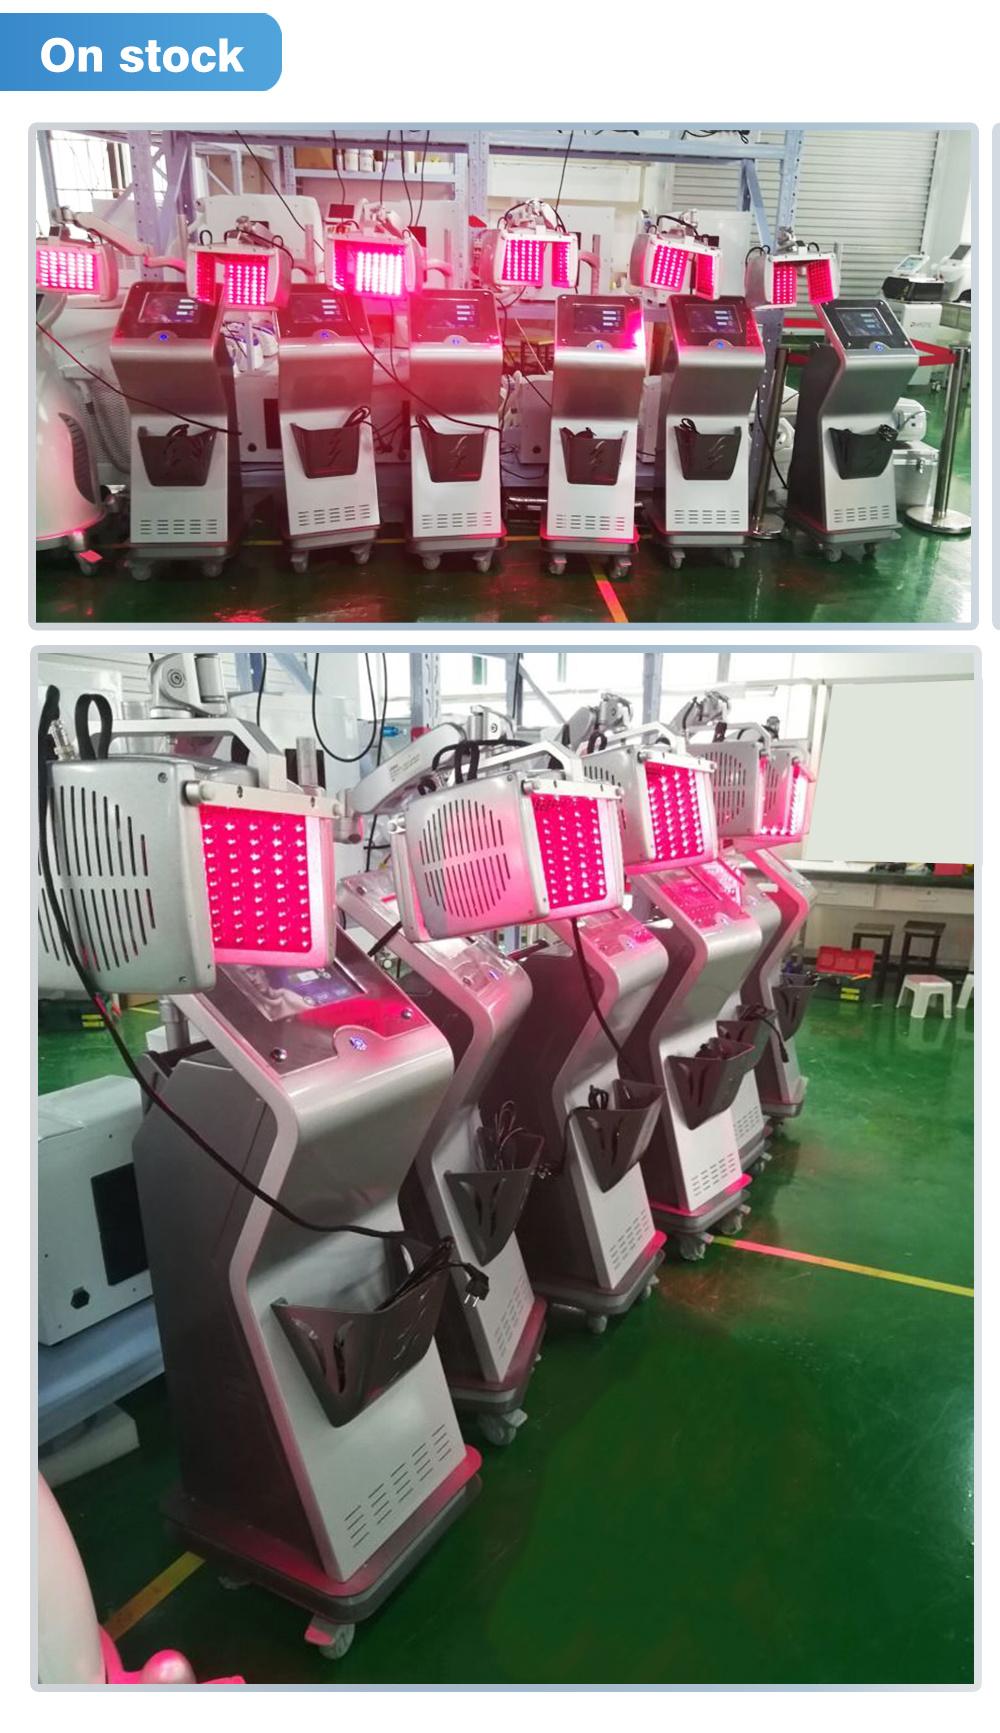 Factory Price Beauty Salon Equipment 670nm Diode Laser Hair Regrowth Machine for Hair Loss Treatment